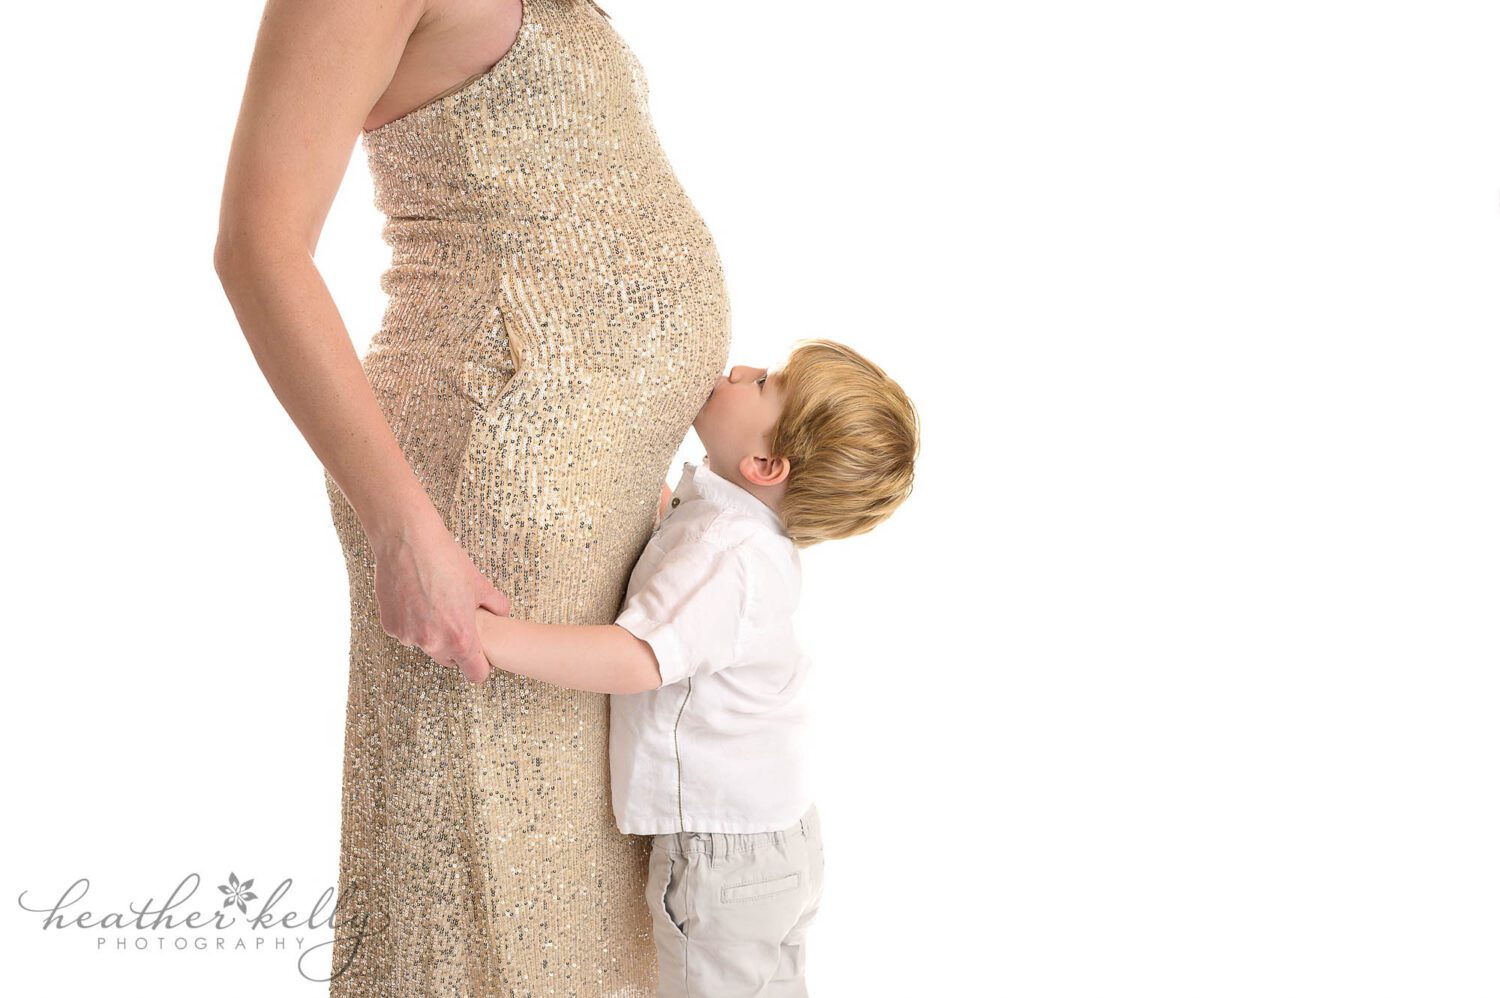 Stamford CT mom to be posing at her maternity portrait photography session.  There is a bright white background. Mom is wearing a sparkly gold dress. Her two year old son is in a white shirt and kissing her belly. 